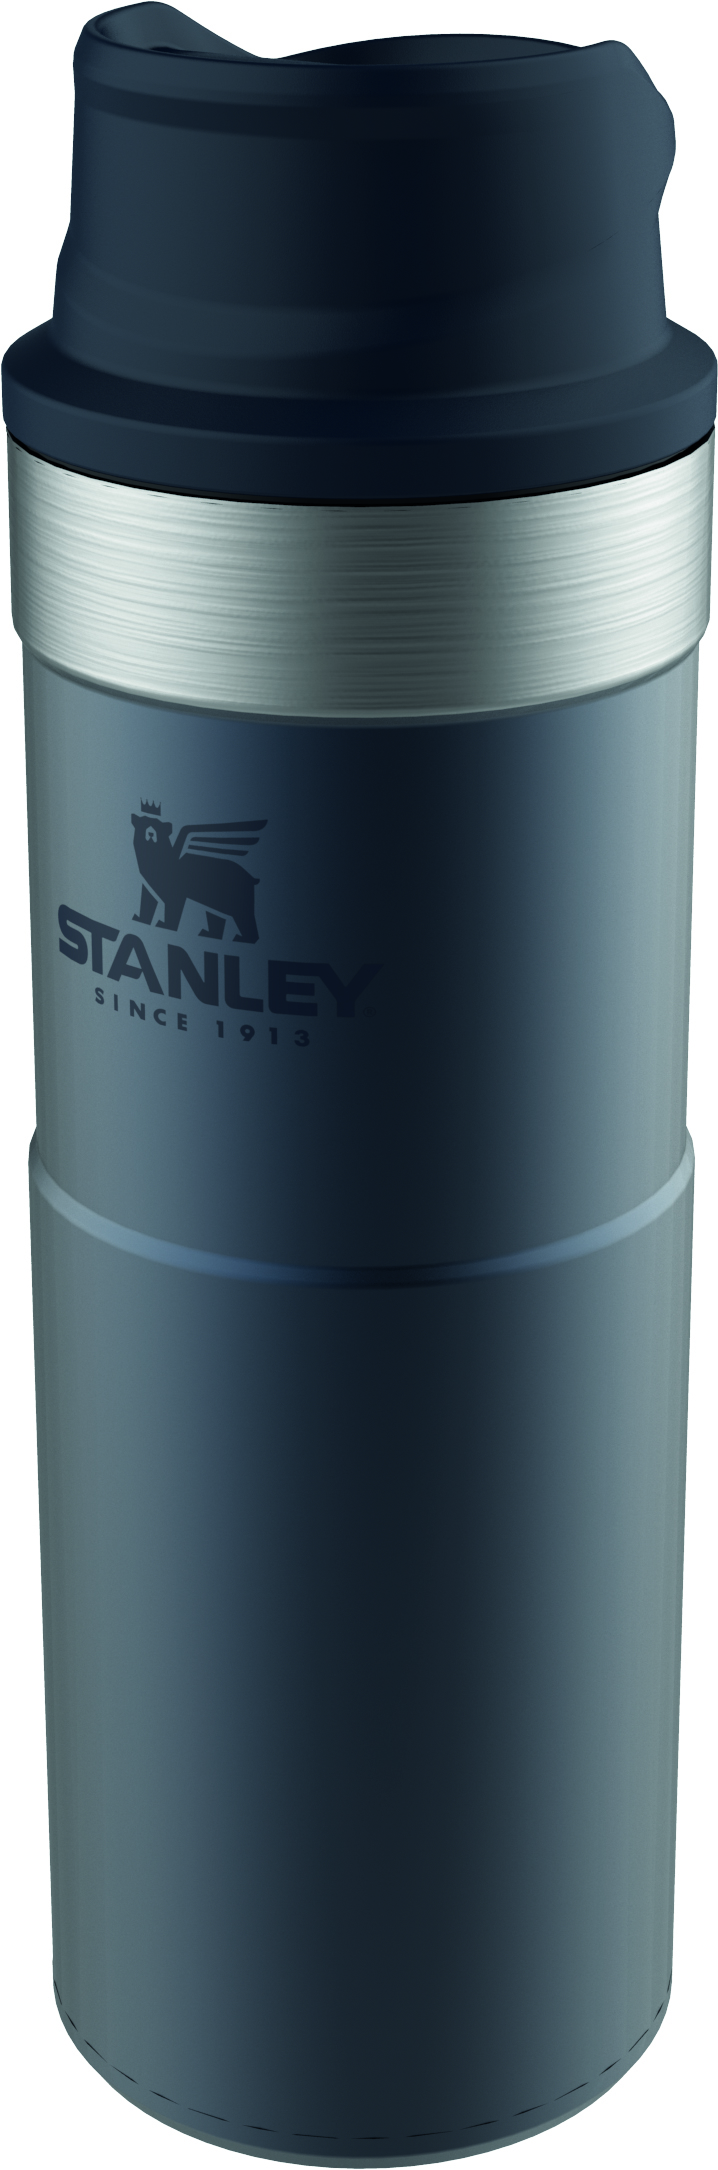 https://promotionway.com/data/shopproducts/1254/stanley-classic-trigger-action-travel-mug-0-47l-2.jpg